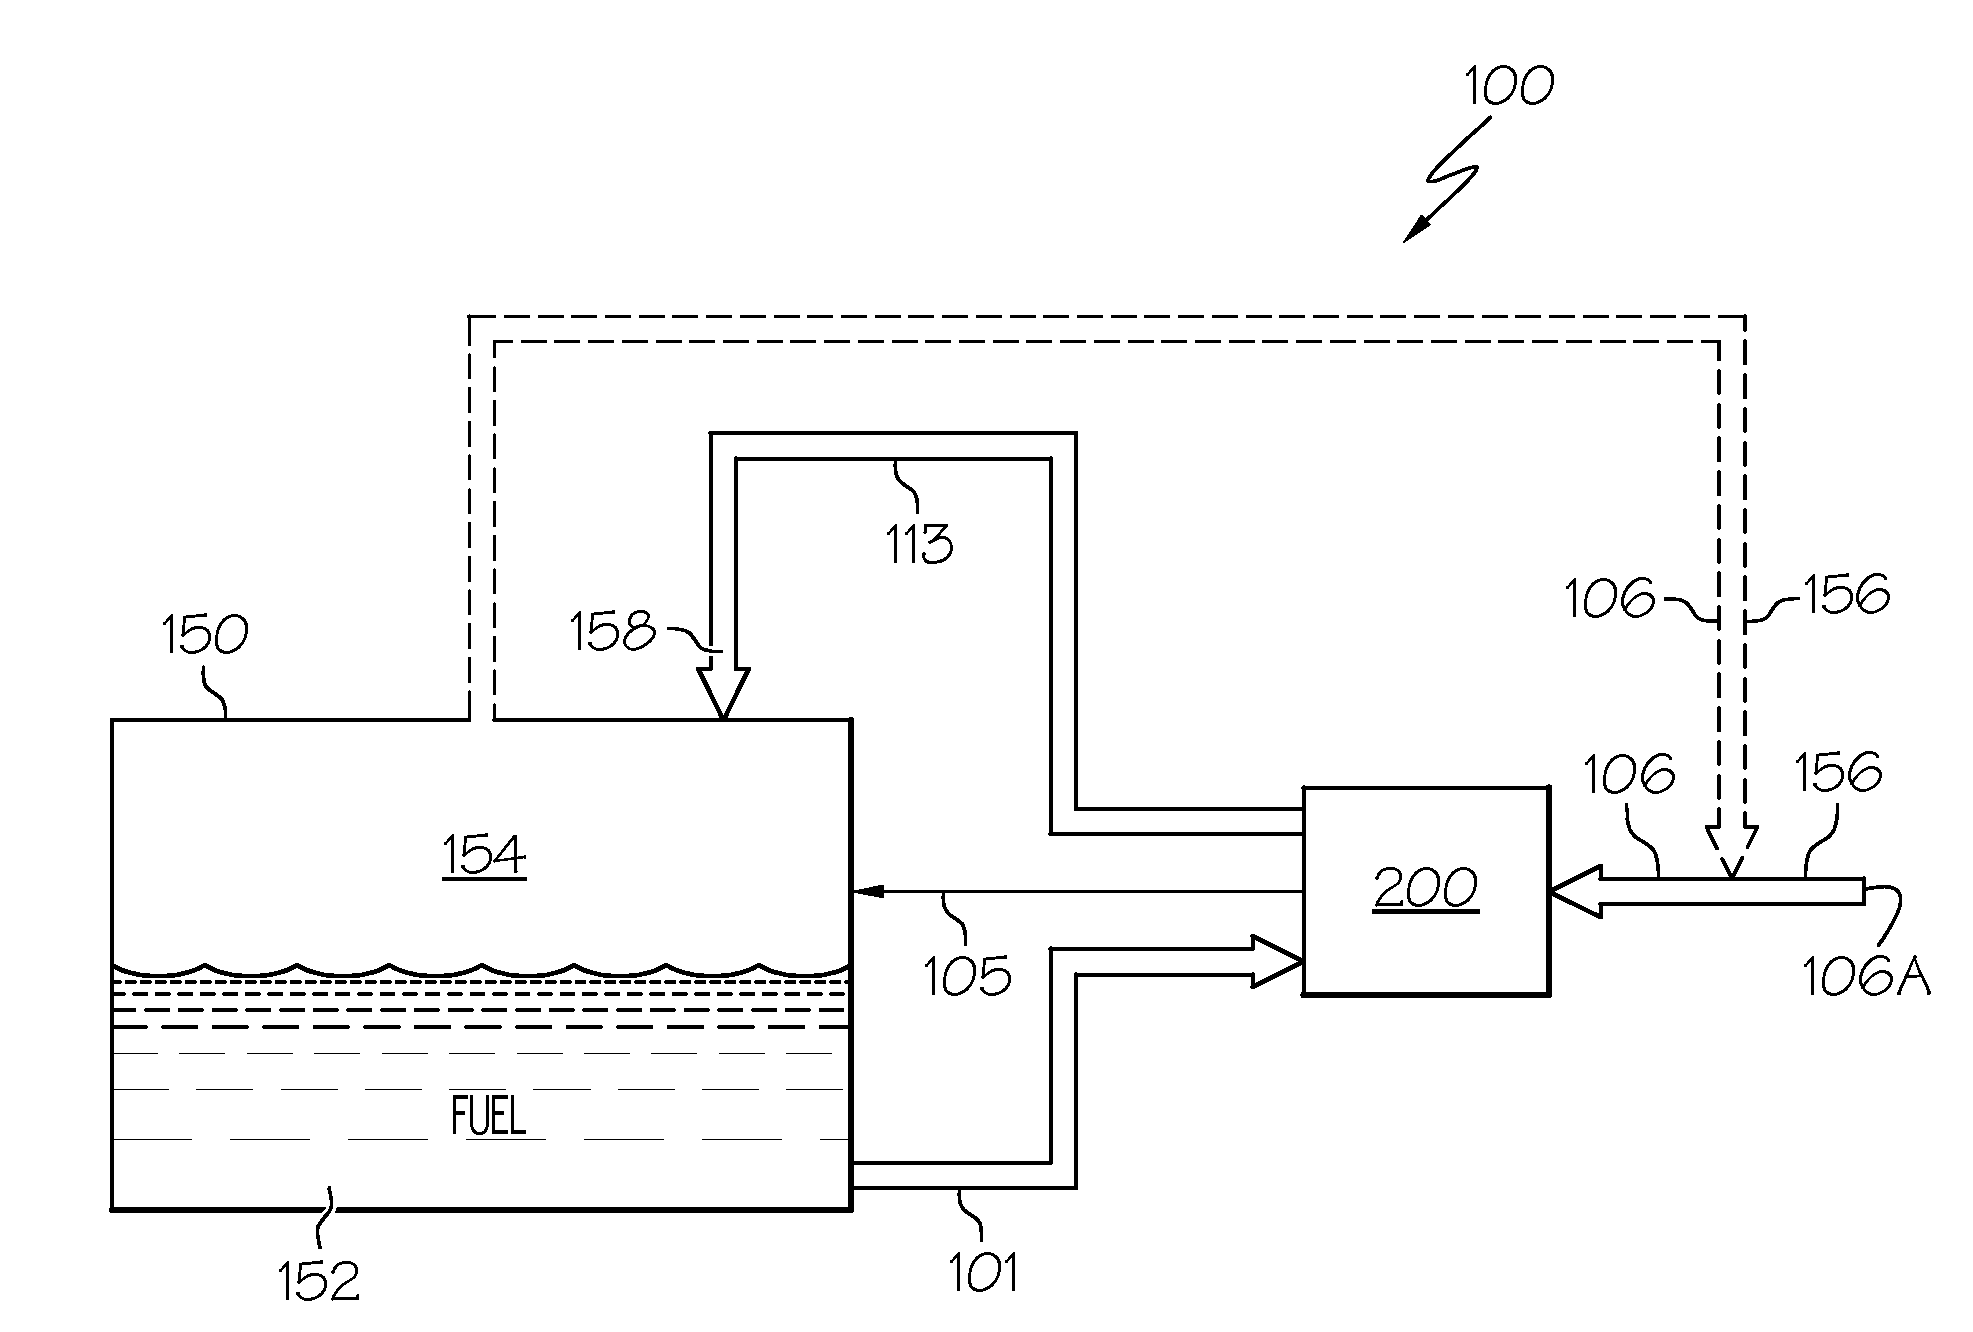 Advanced carbon dioxide fuel tank inerting system